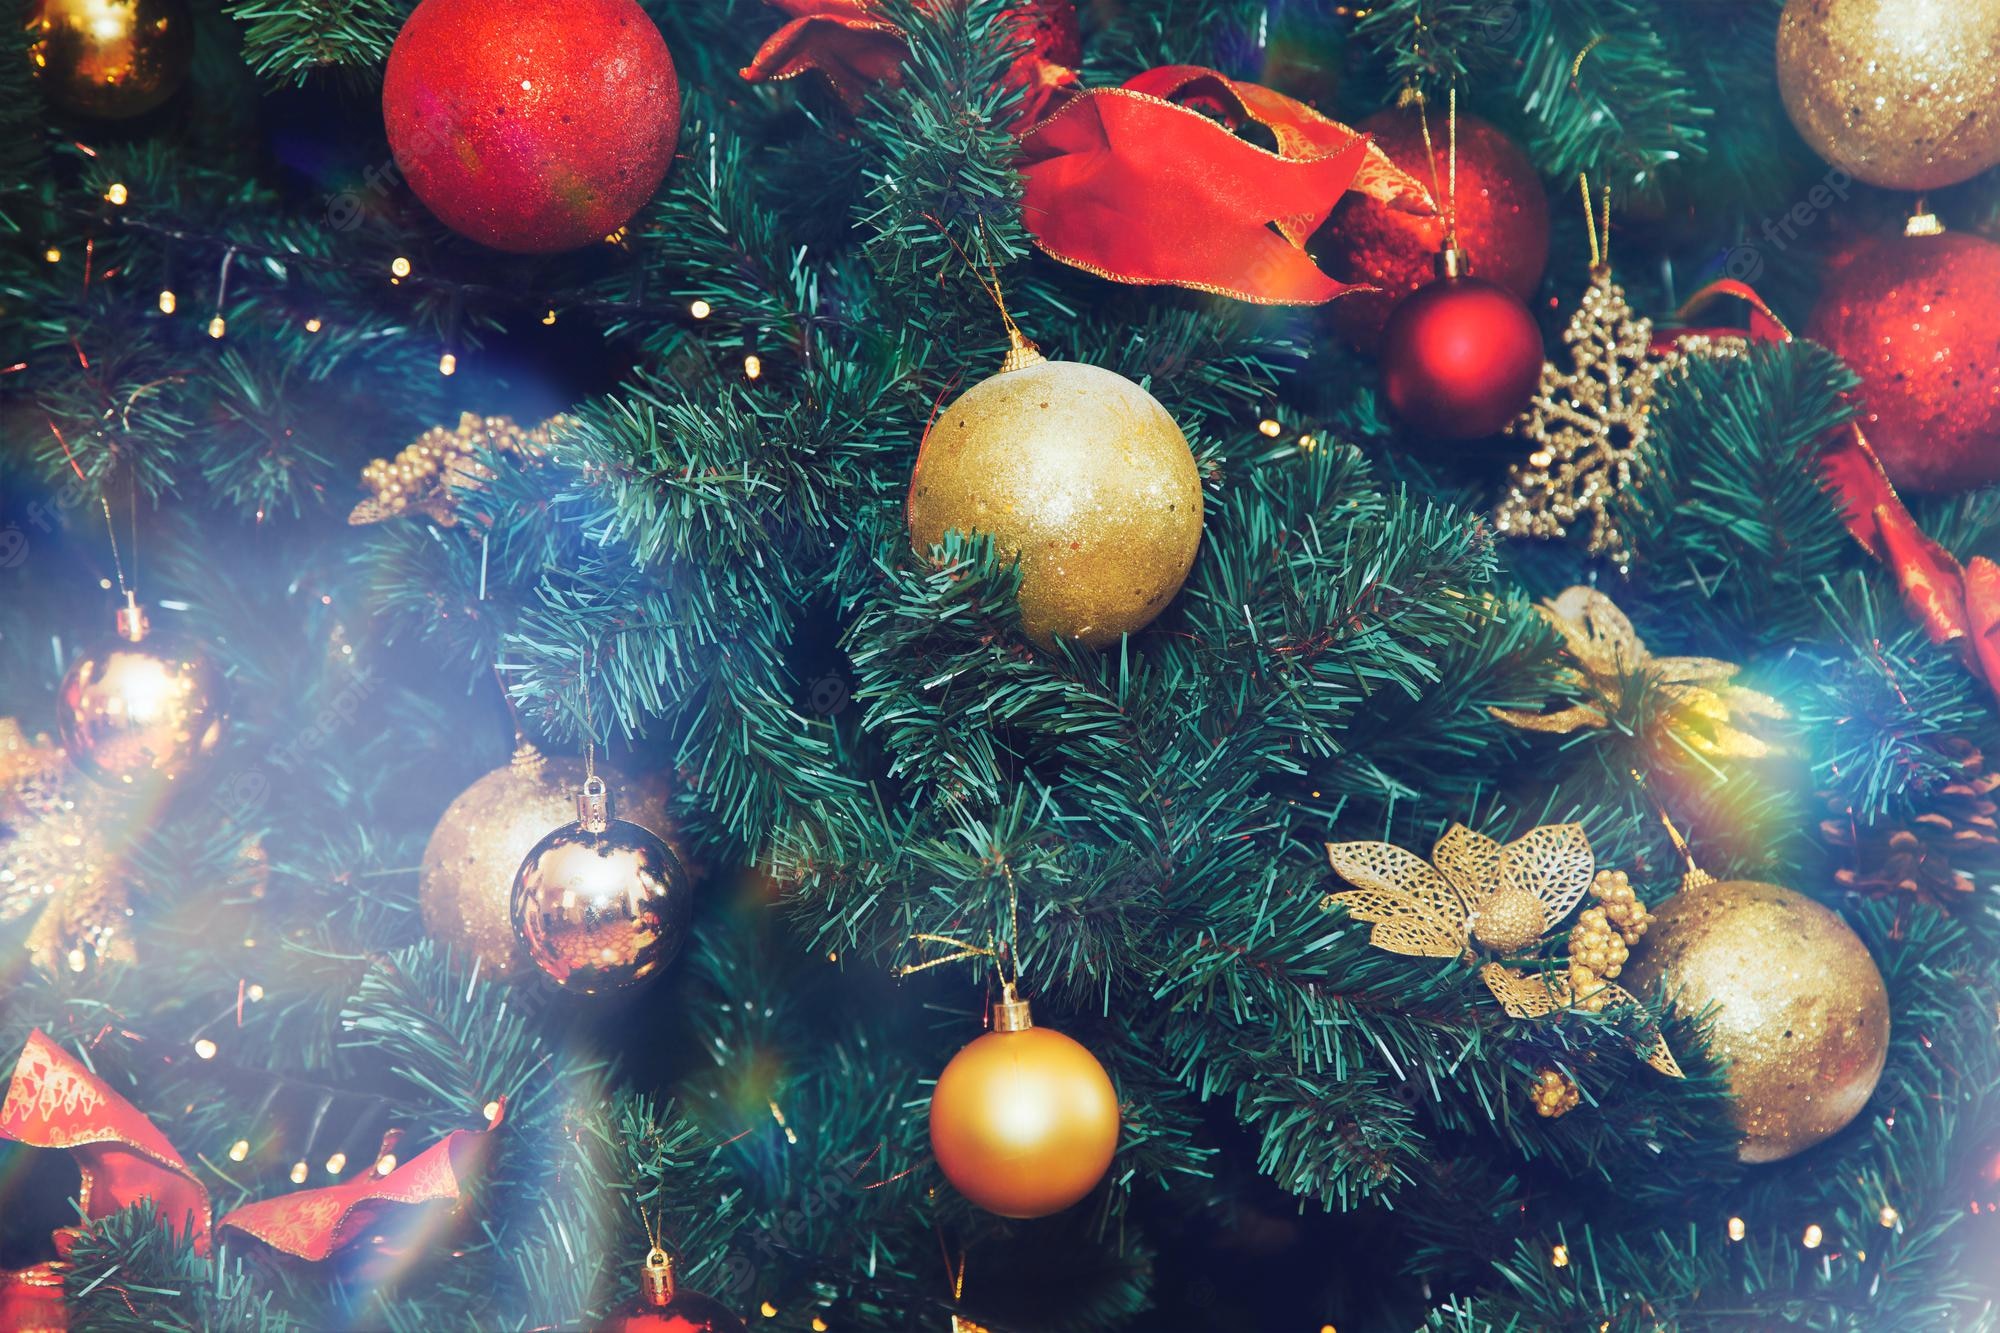 Premium Photo. Close Up Christmas Holiday Background Of Decorated Tree With Christmas Balls And Toys. Concept Of Celebrating Happy New Year. Decor Or In Home Interior. Copy Space For Site